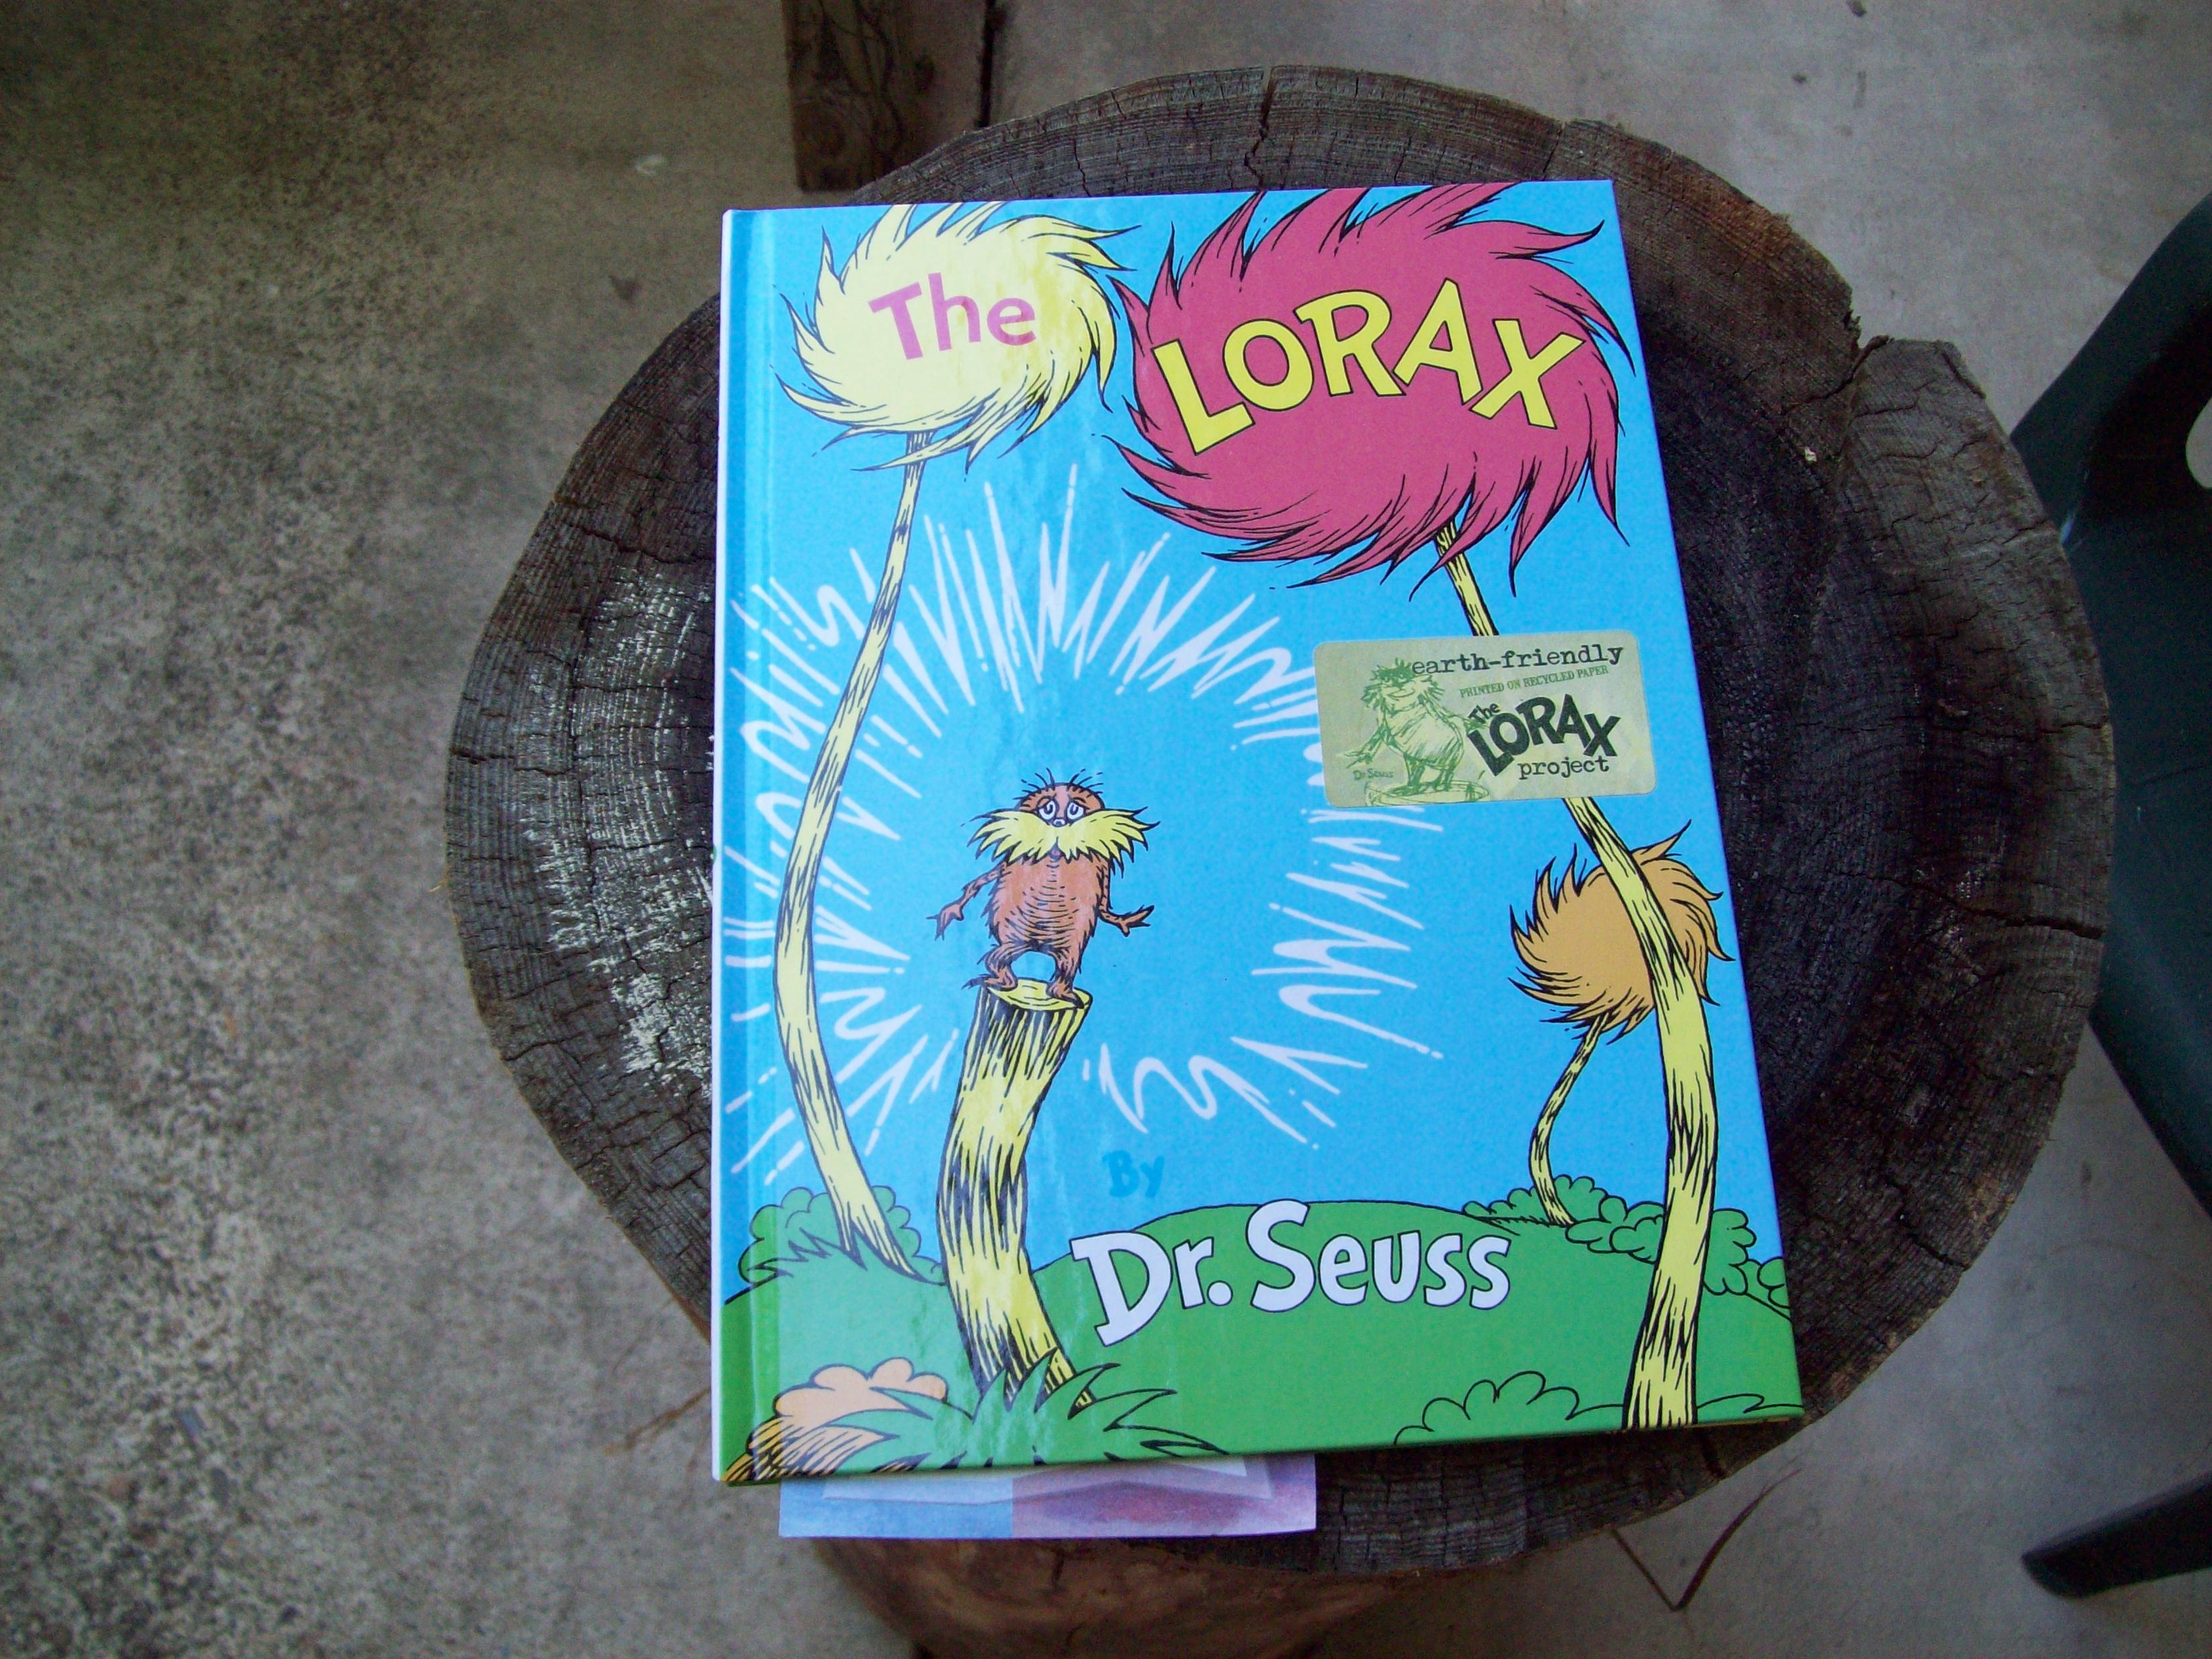 The Lorax, by Dr. Seuss